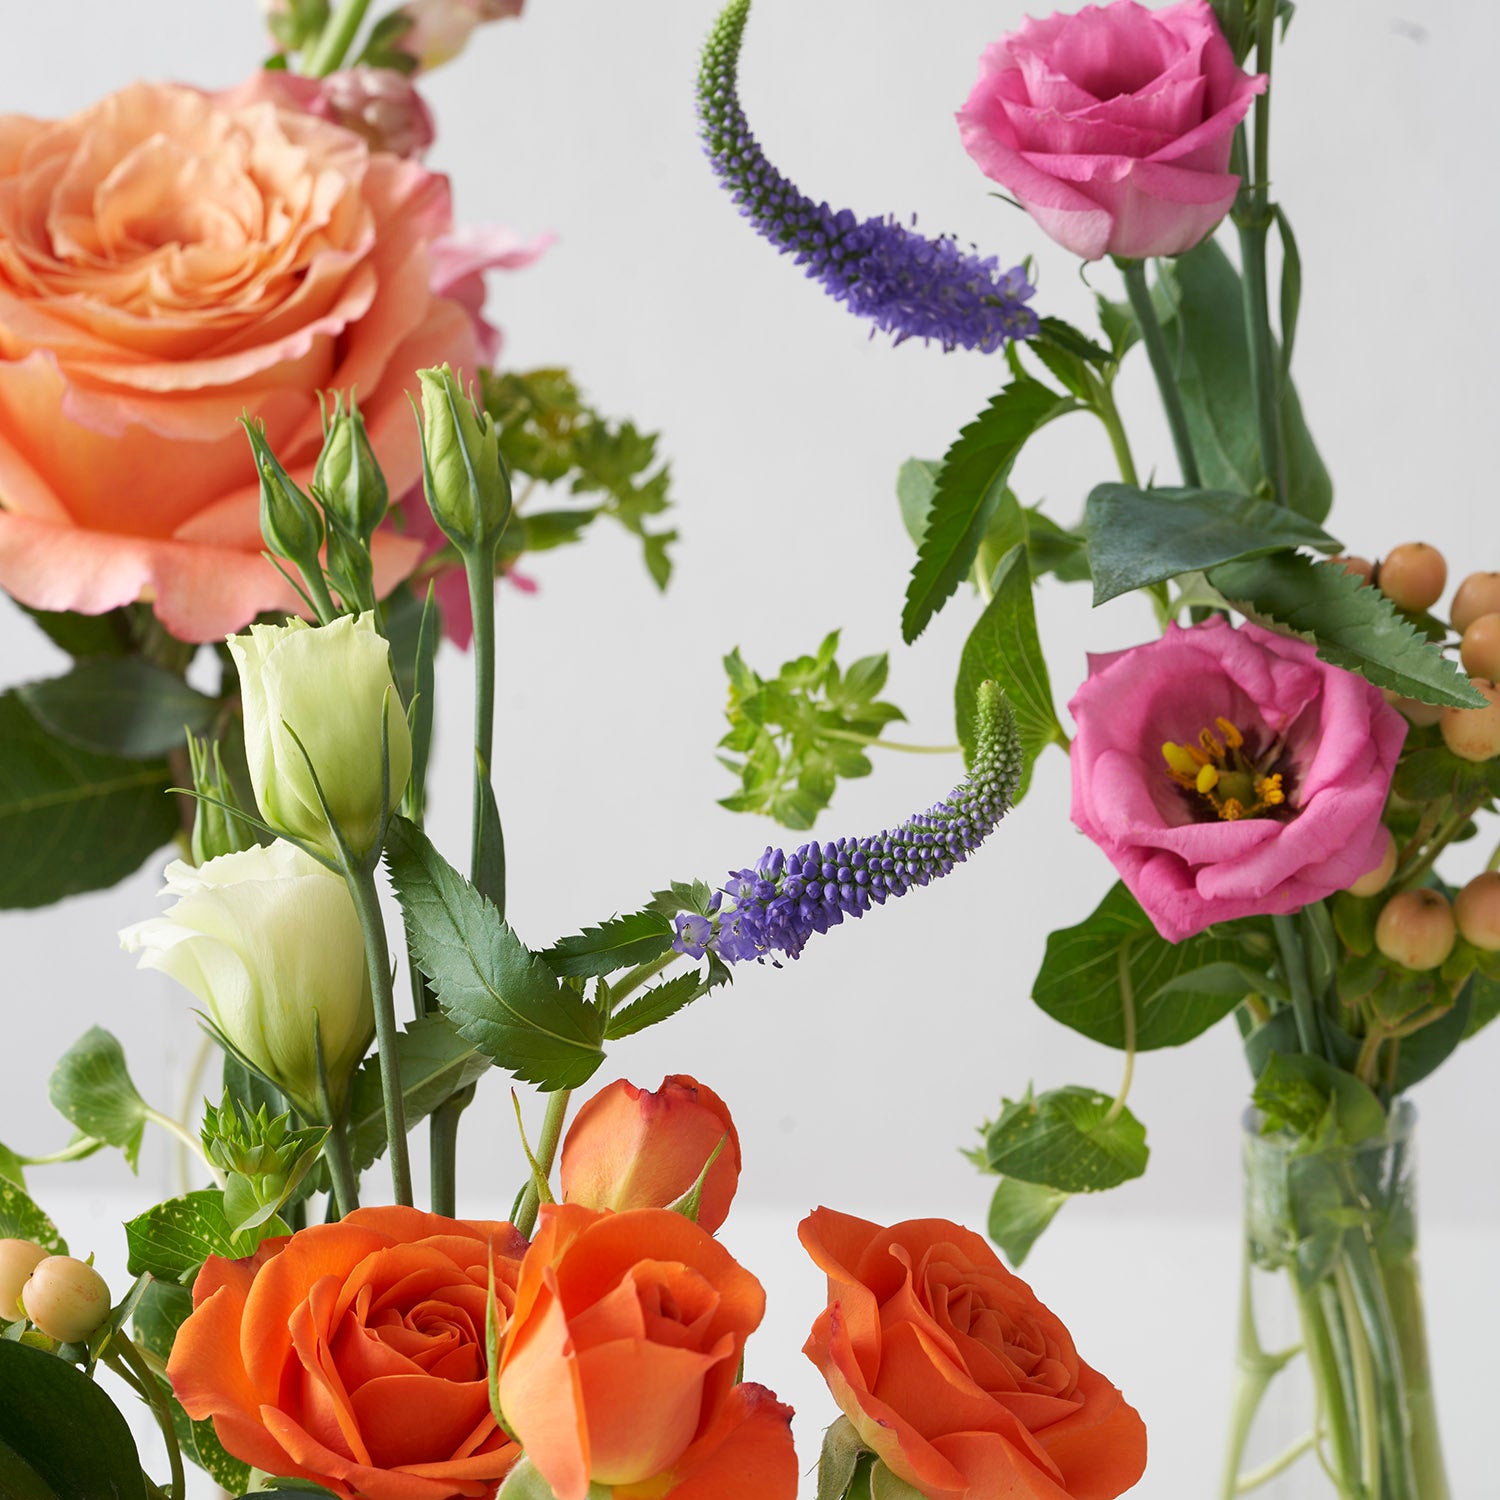 Closeup of orange roses, pink lisianthus, and purple veronica flowers on white background.